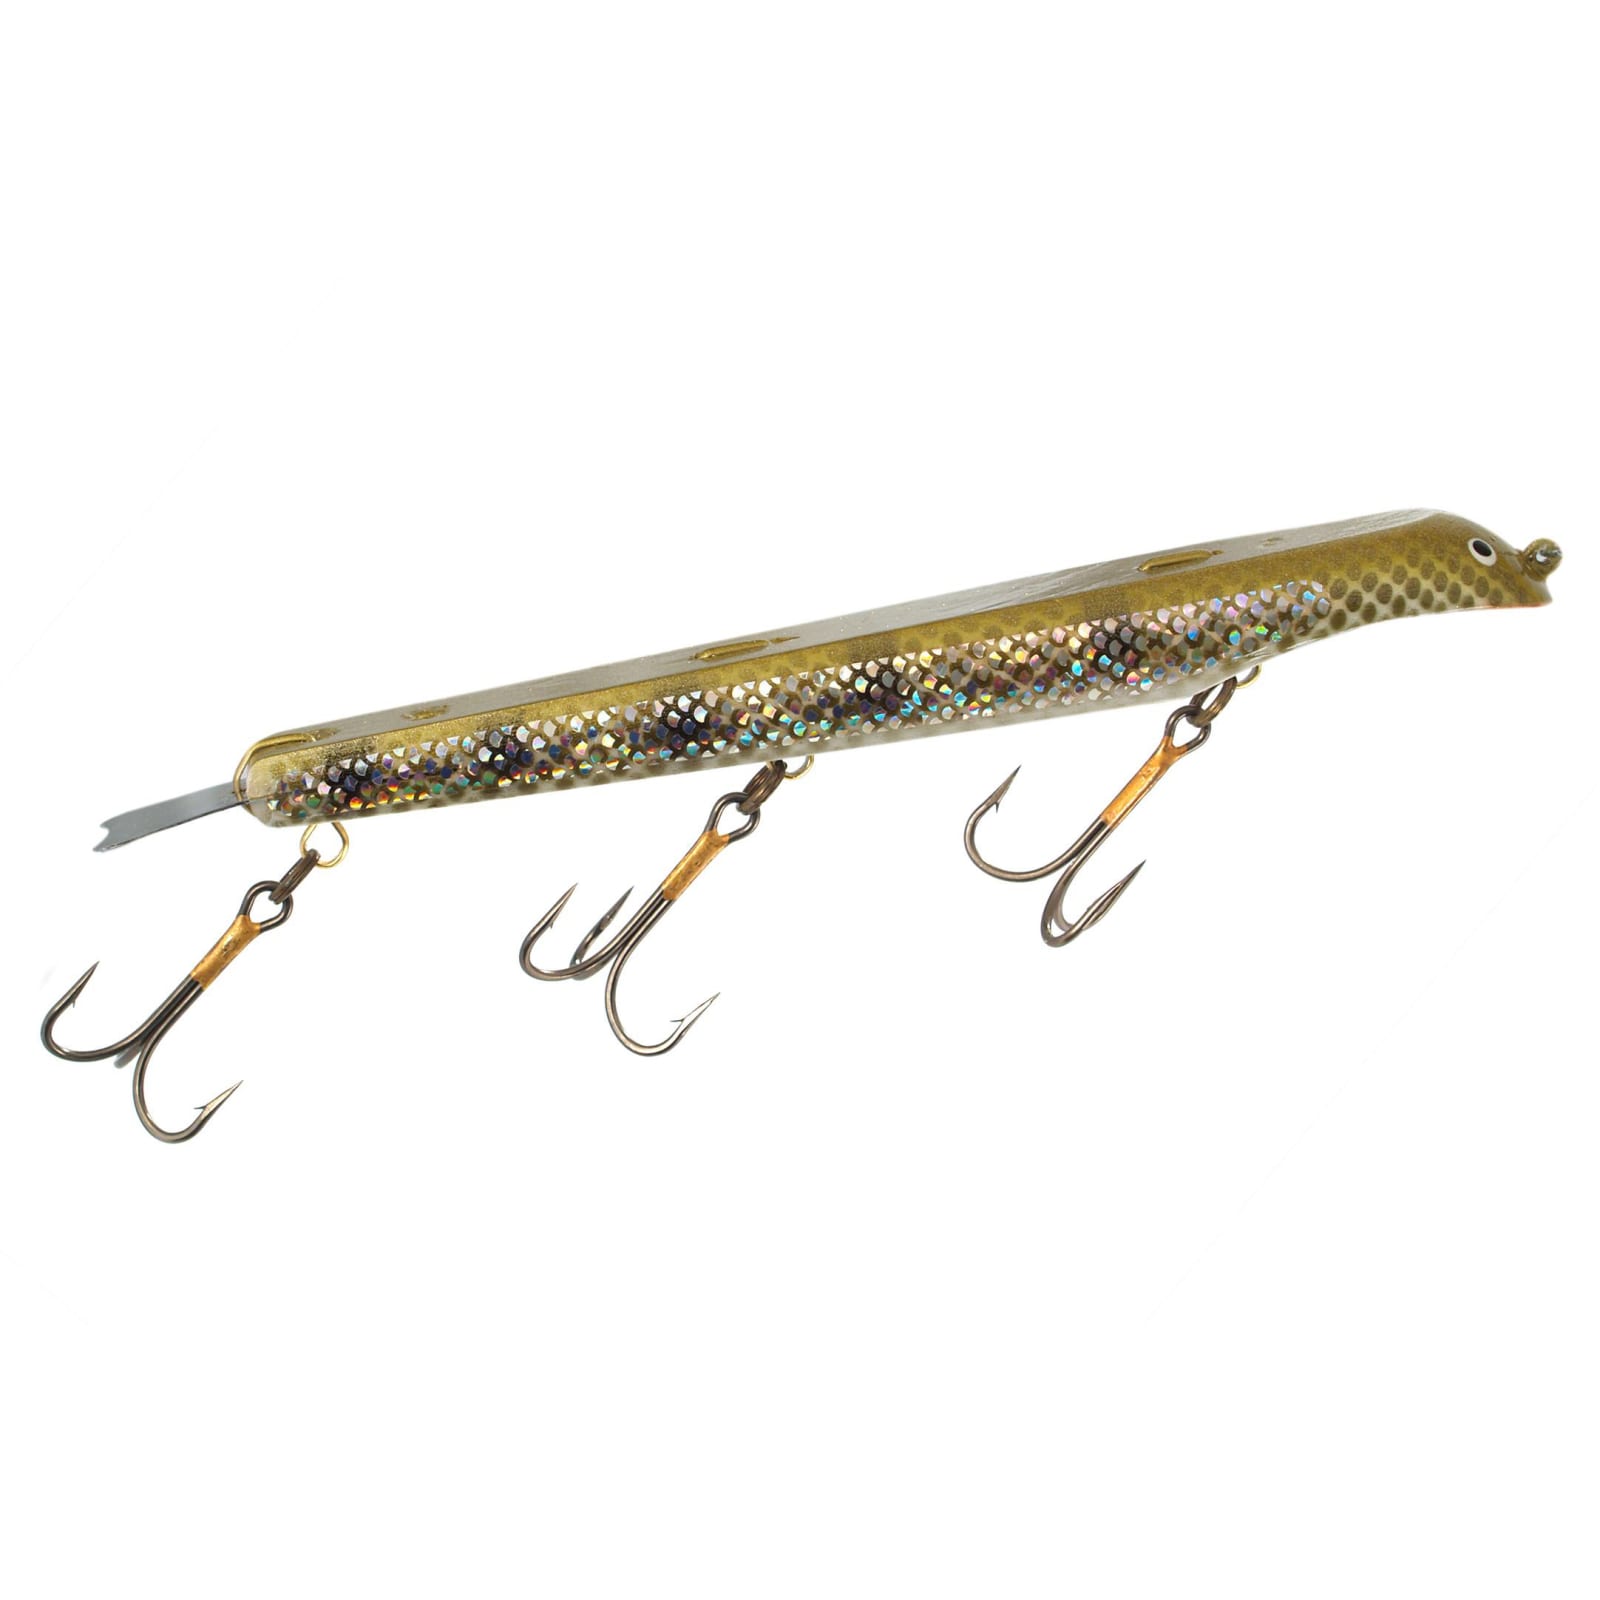 Giant Fishing Lure Store Advertising Display Musky Suick Body 27”